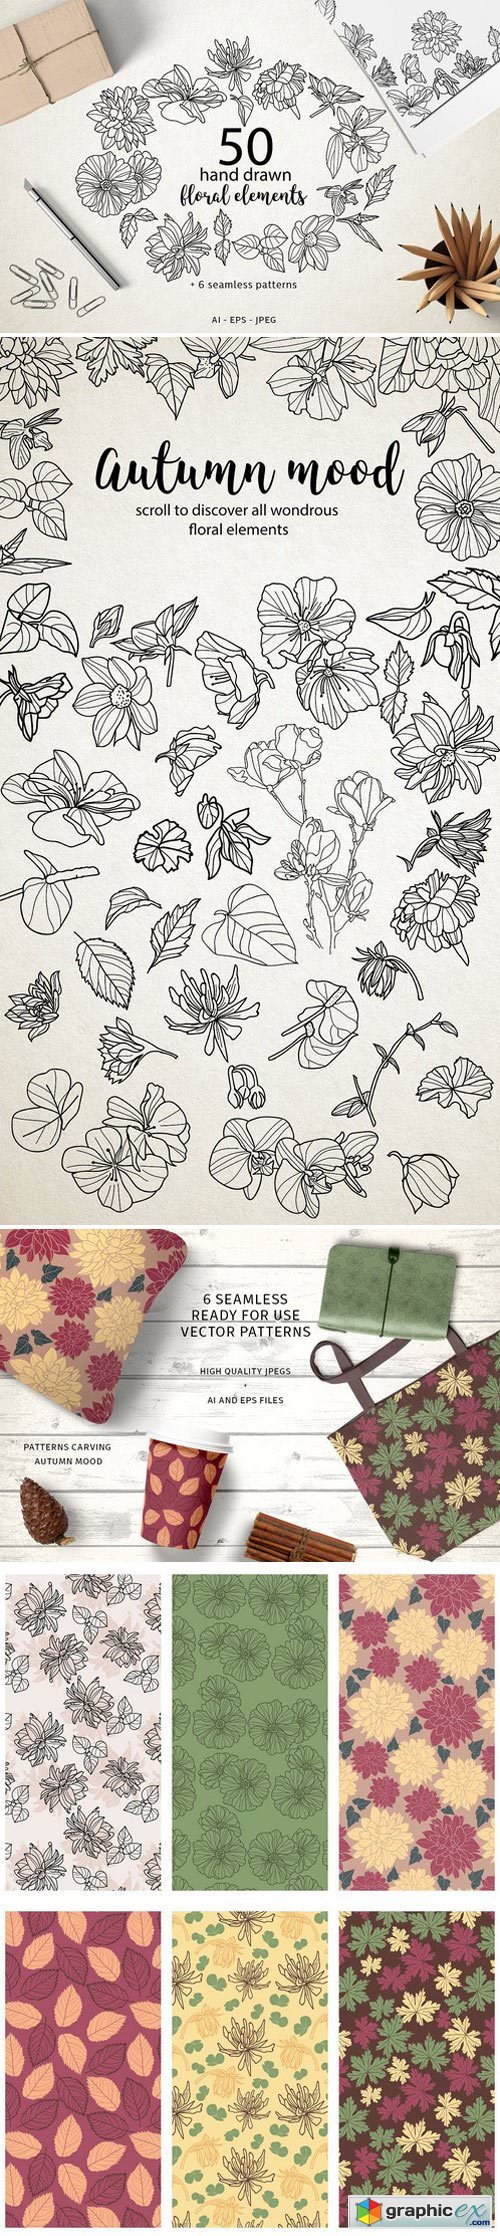 50 hand drawn floral elements